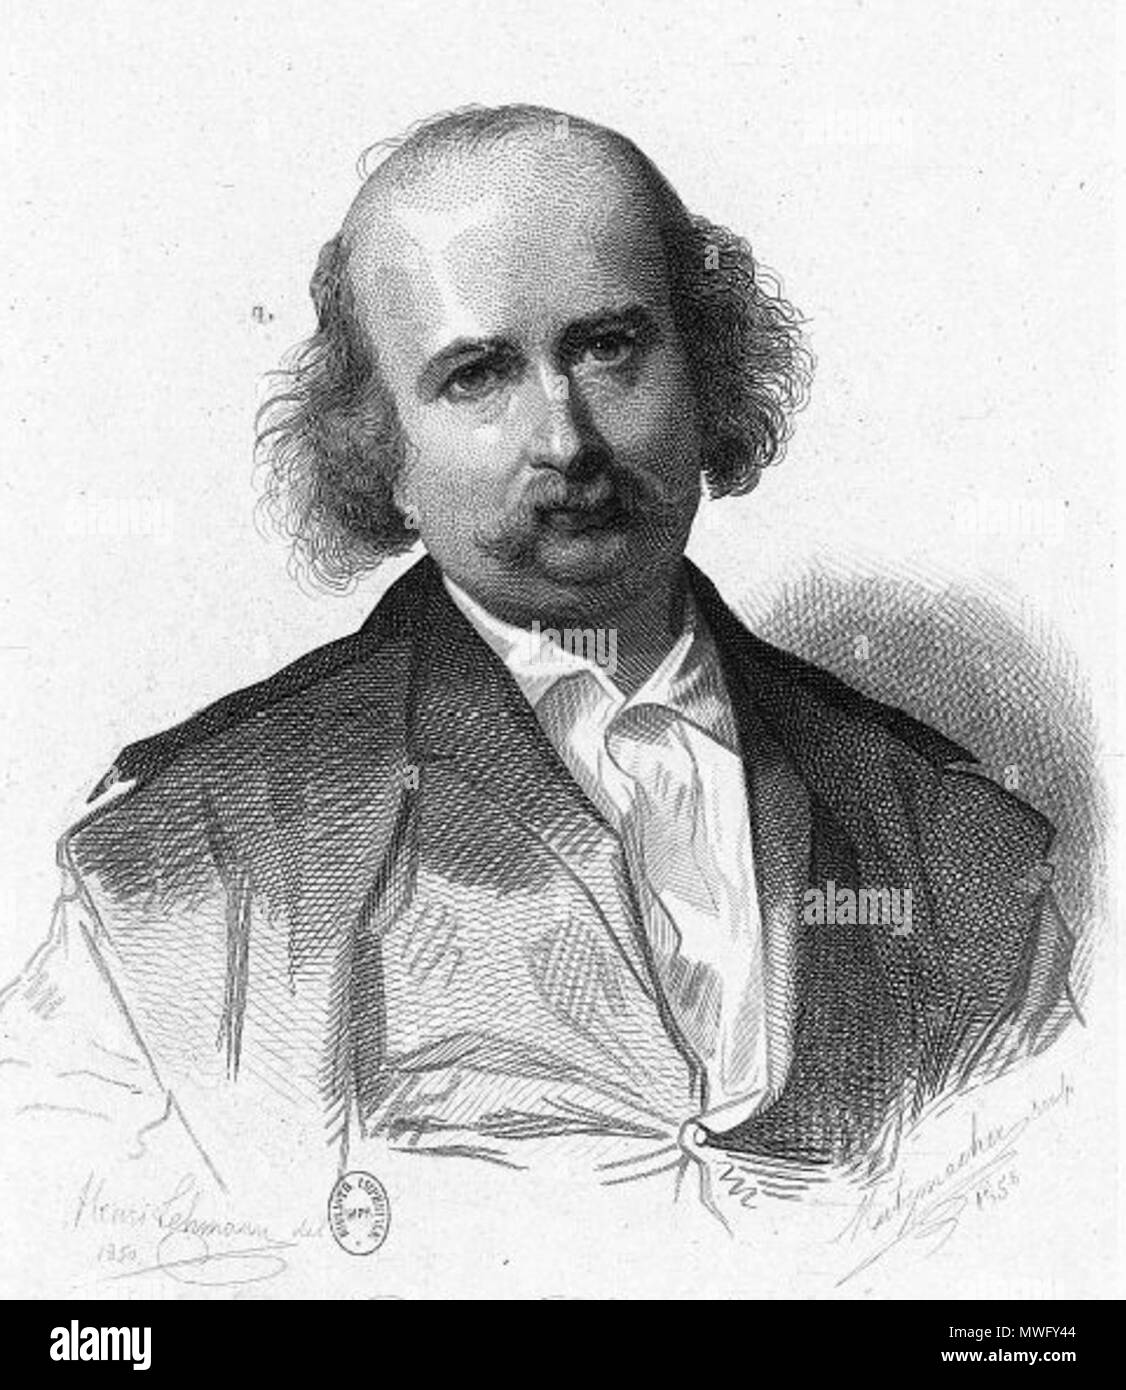 . Portrait of French writer and playwright Jules Sandeau (1811-1883) by Pierre Guillaume Metzmacher or Émile Pierre Metzmacher after Henri Lehmann (1814-1882) . 1858. Metzmacher after Henri Lehmann 328 Jules Sandeau by Henri Lehmann Stock Photo